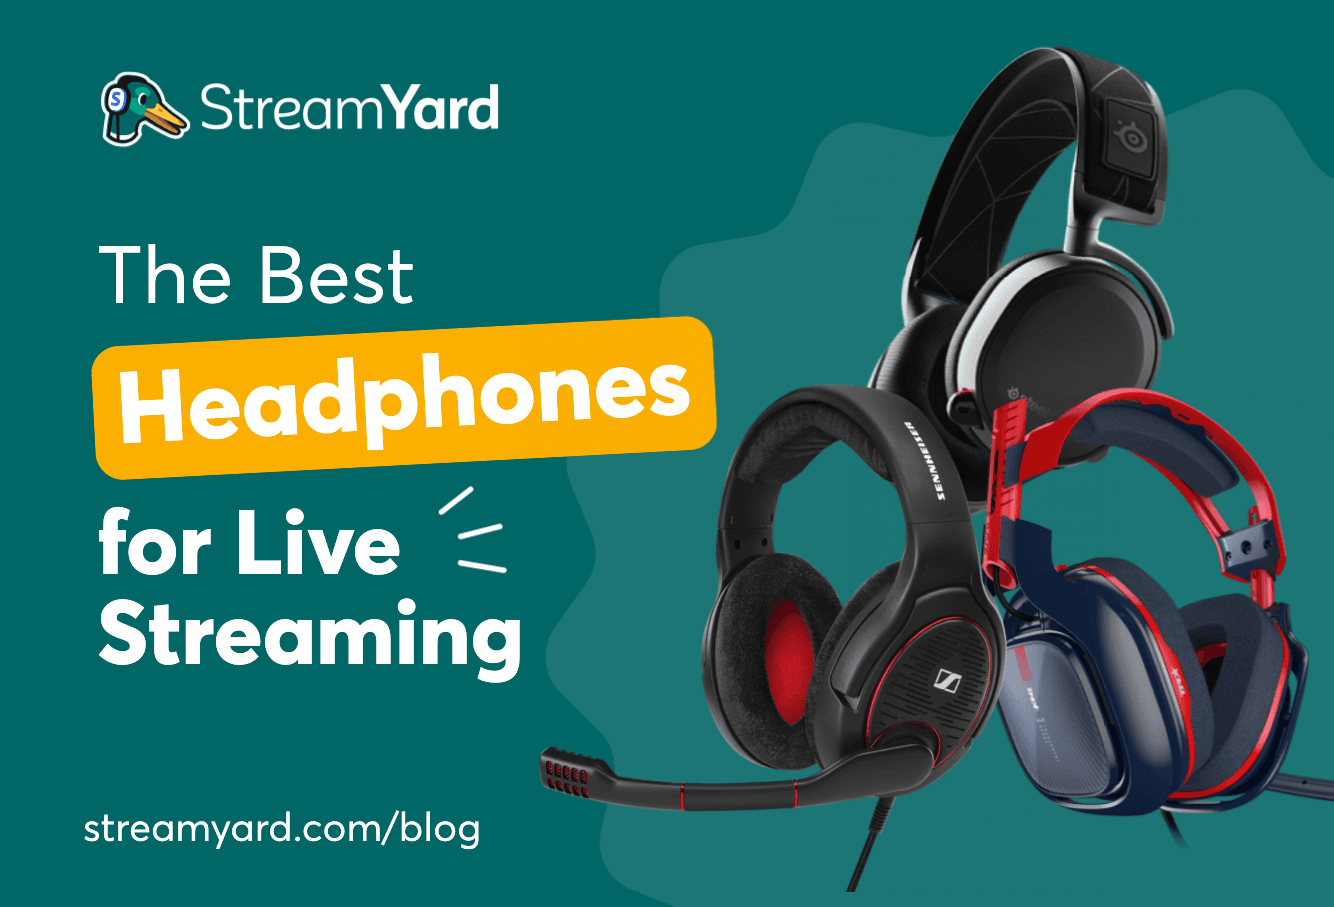 Learn how to pick the best headphones for live streaming, including what features to look for, the audio quality, and how you plan to use them when livestreaming.